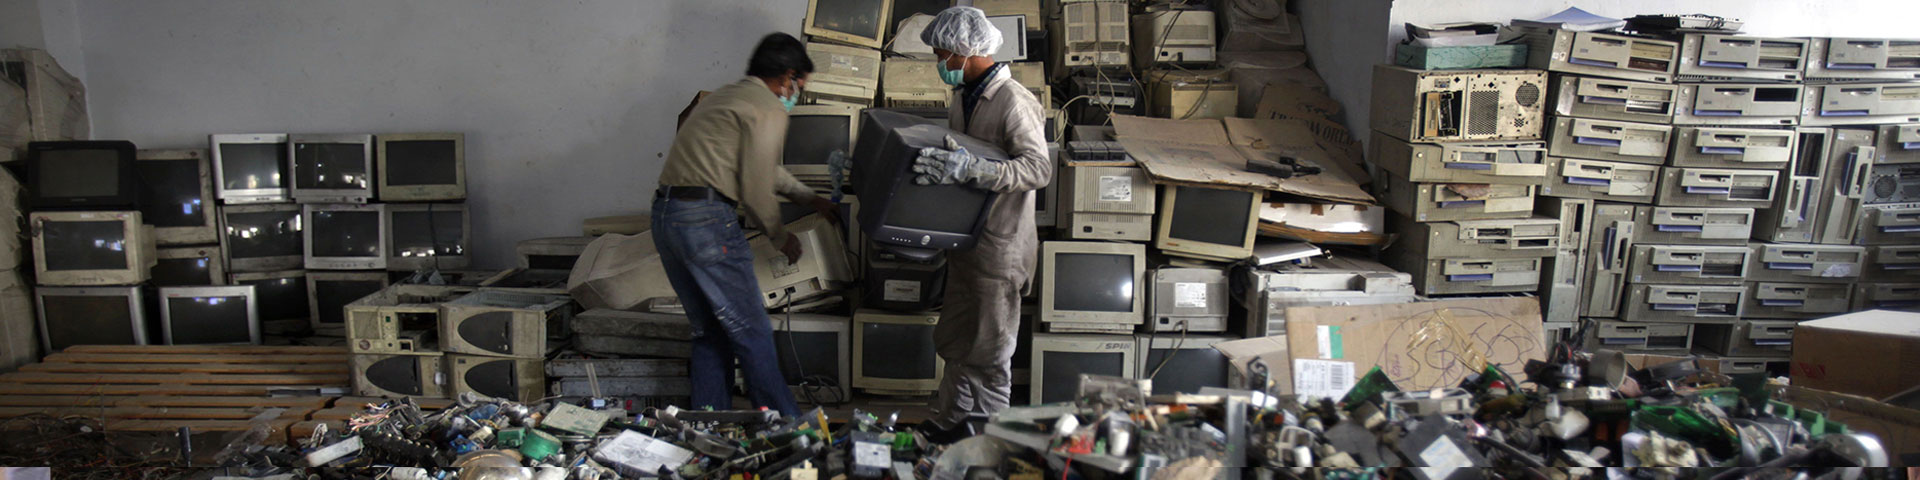 Two people dismantling and recycling e-waste